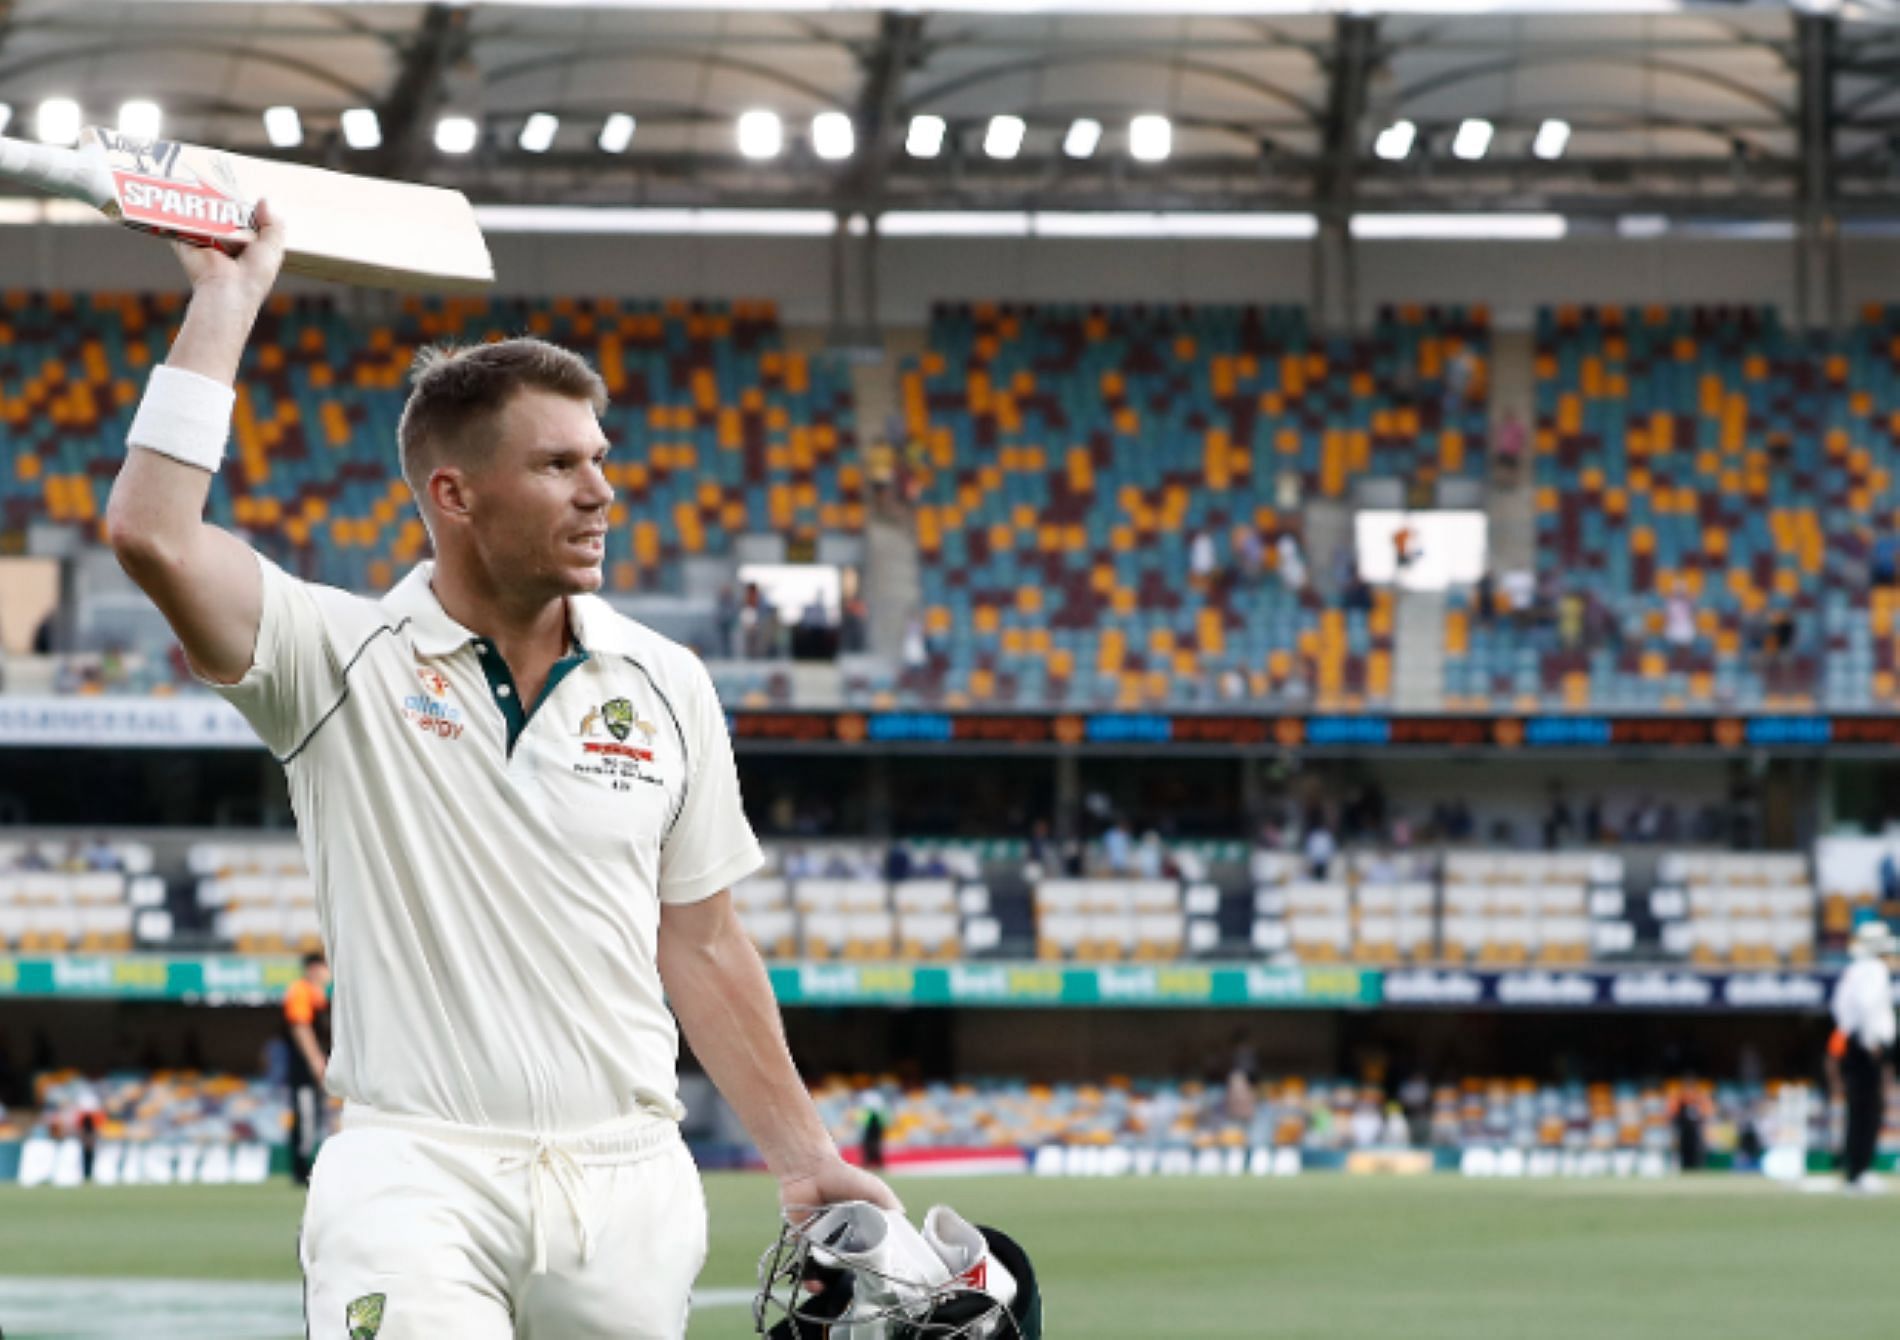 Warner is likely to play his farewell Test at the SCG.